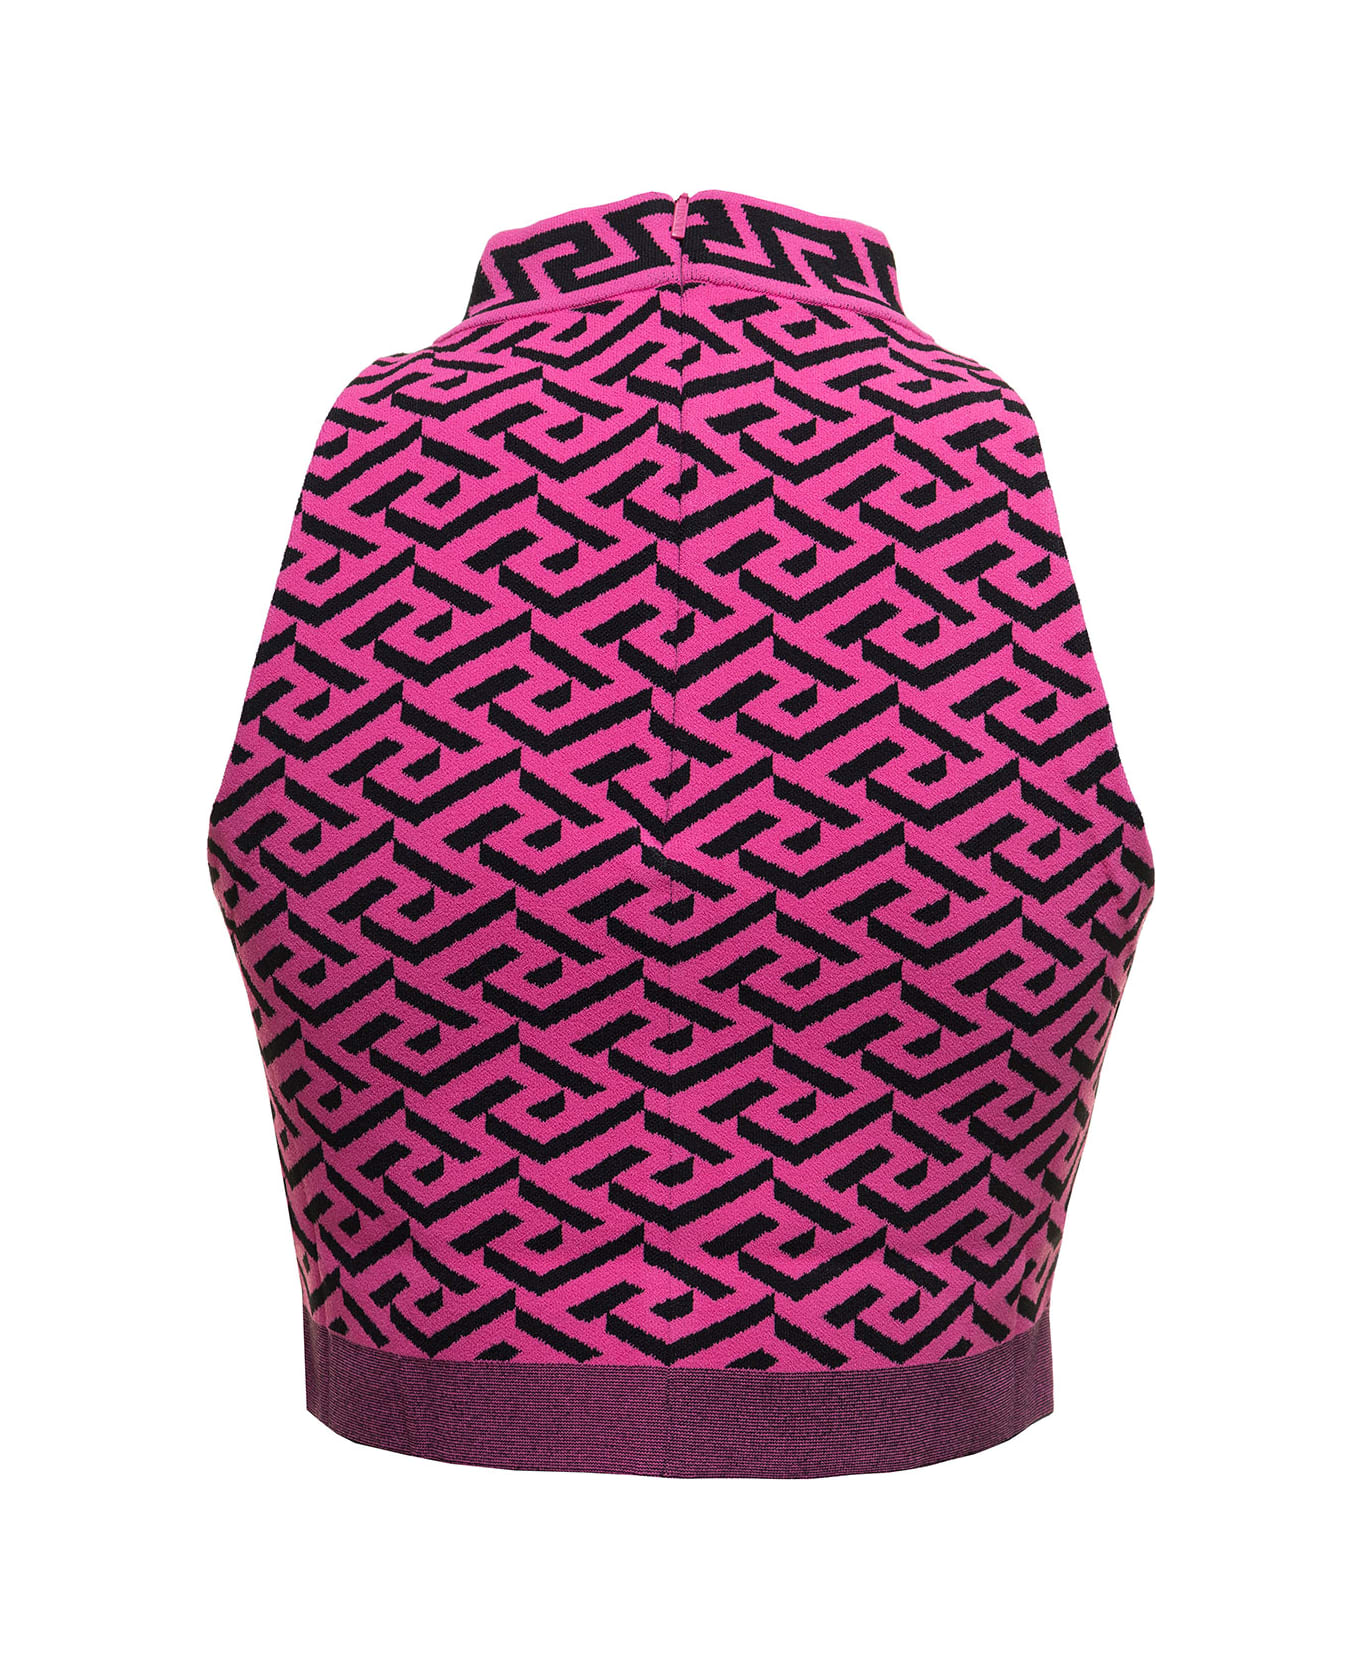 Versace Jacquard Knit Sleveeless Top - Fuxia